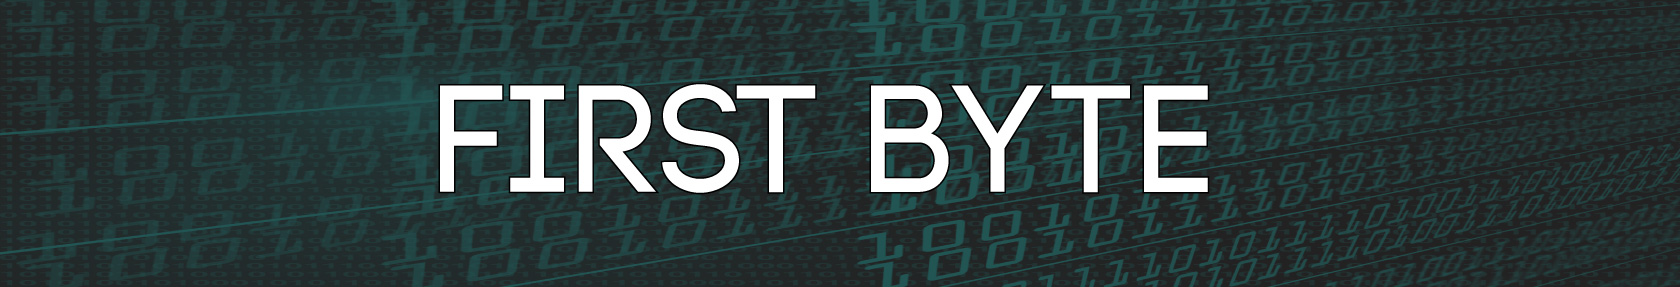 First Byte Corporation